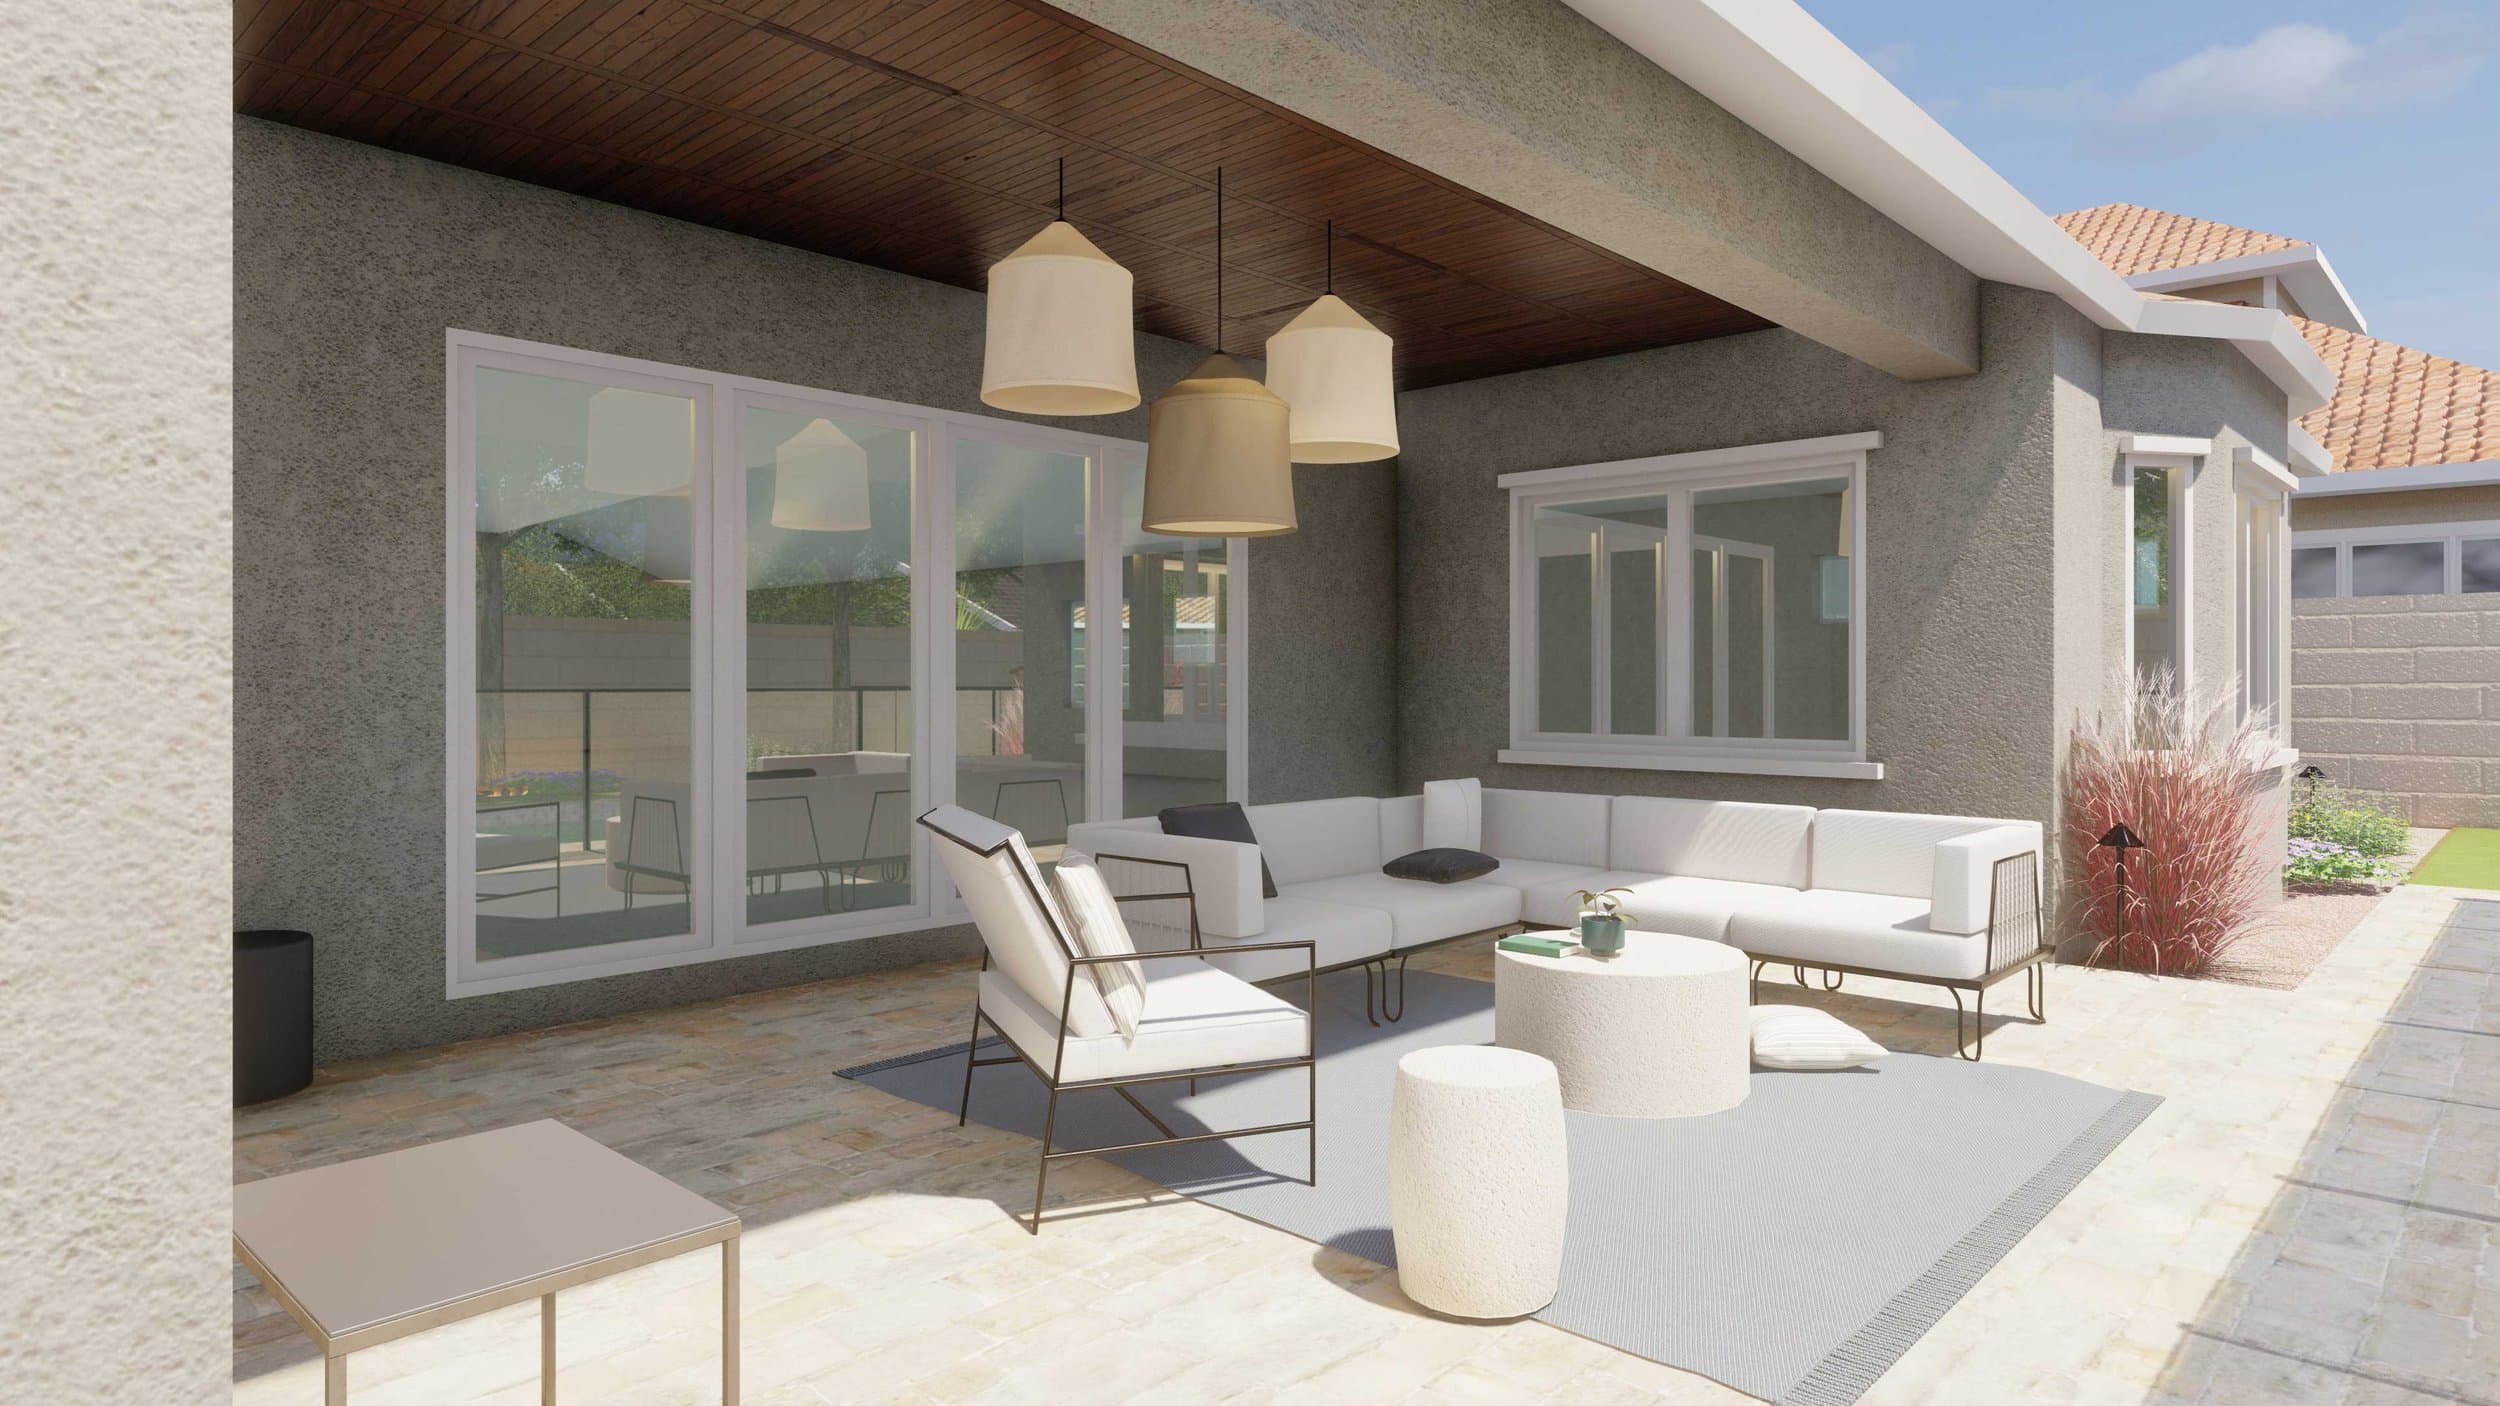 back covered patio with hanging lights and outdoor lounge seating